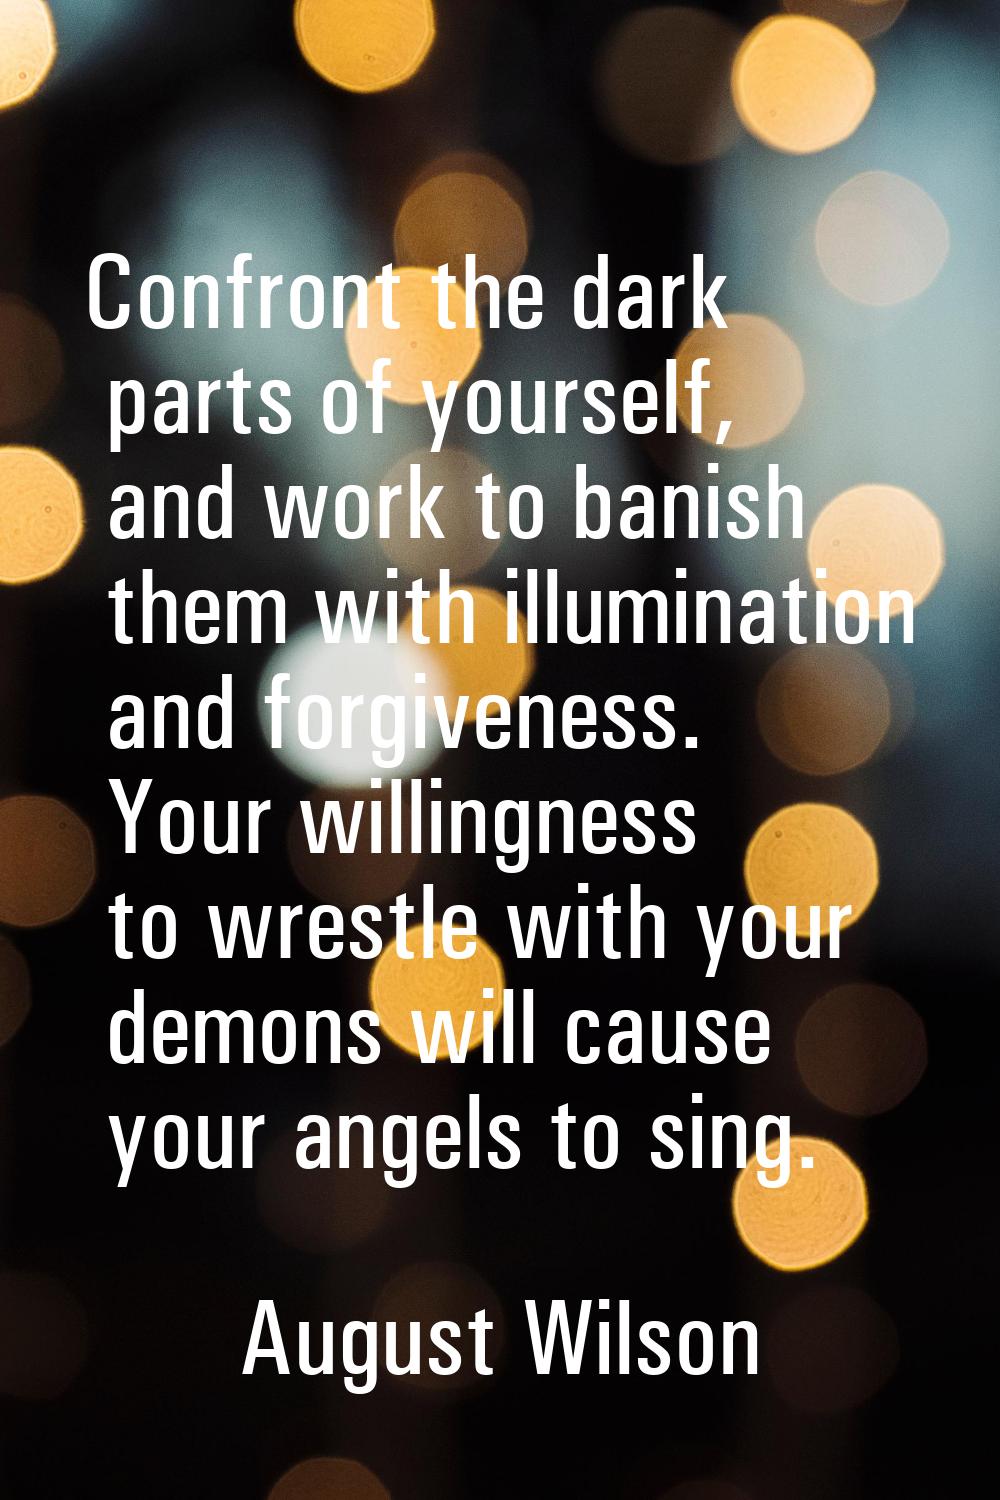 Confront the dark parts of yourself, and work to banish them with illumination and forgiveness. You